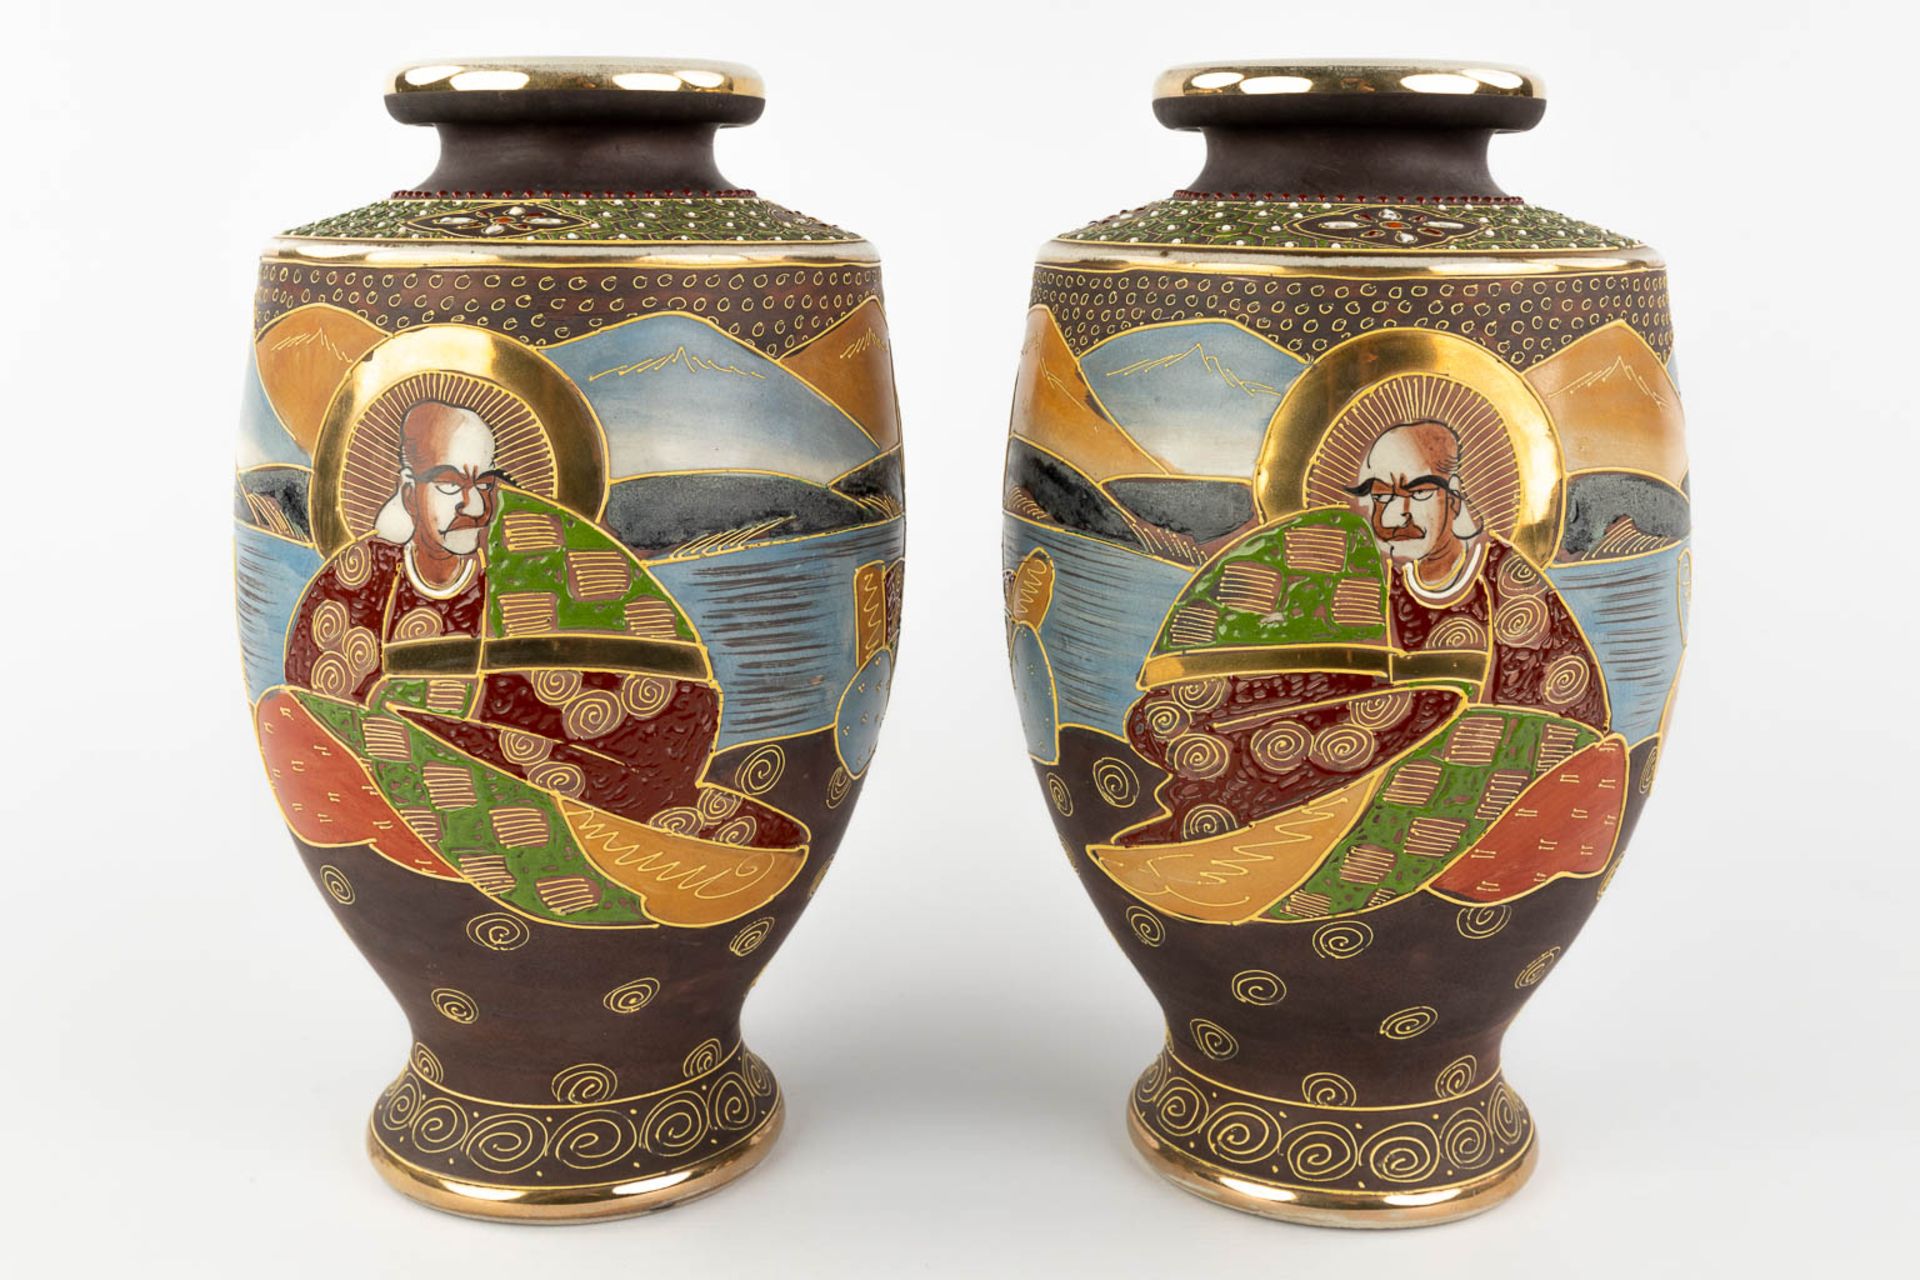 A pair of vases, a vase and jar with lid, Satsuma faience, Japan. 20th C. (H:31 x D:19 cm) - Image 4 of 19